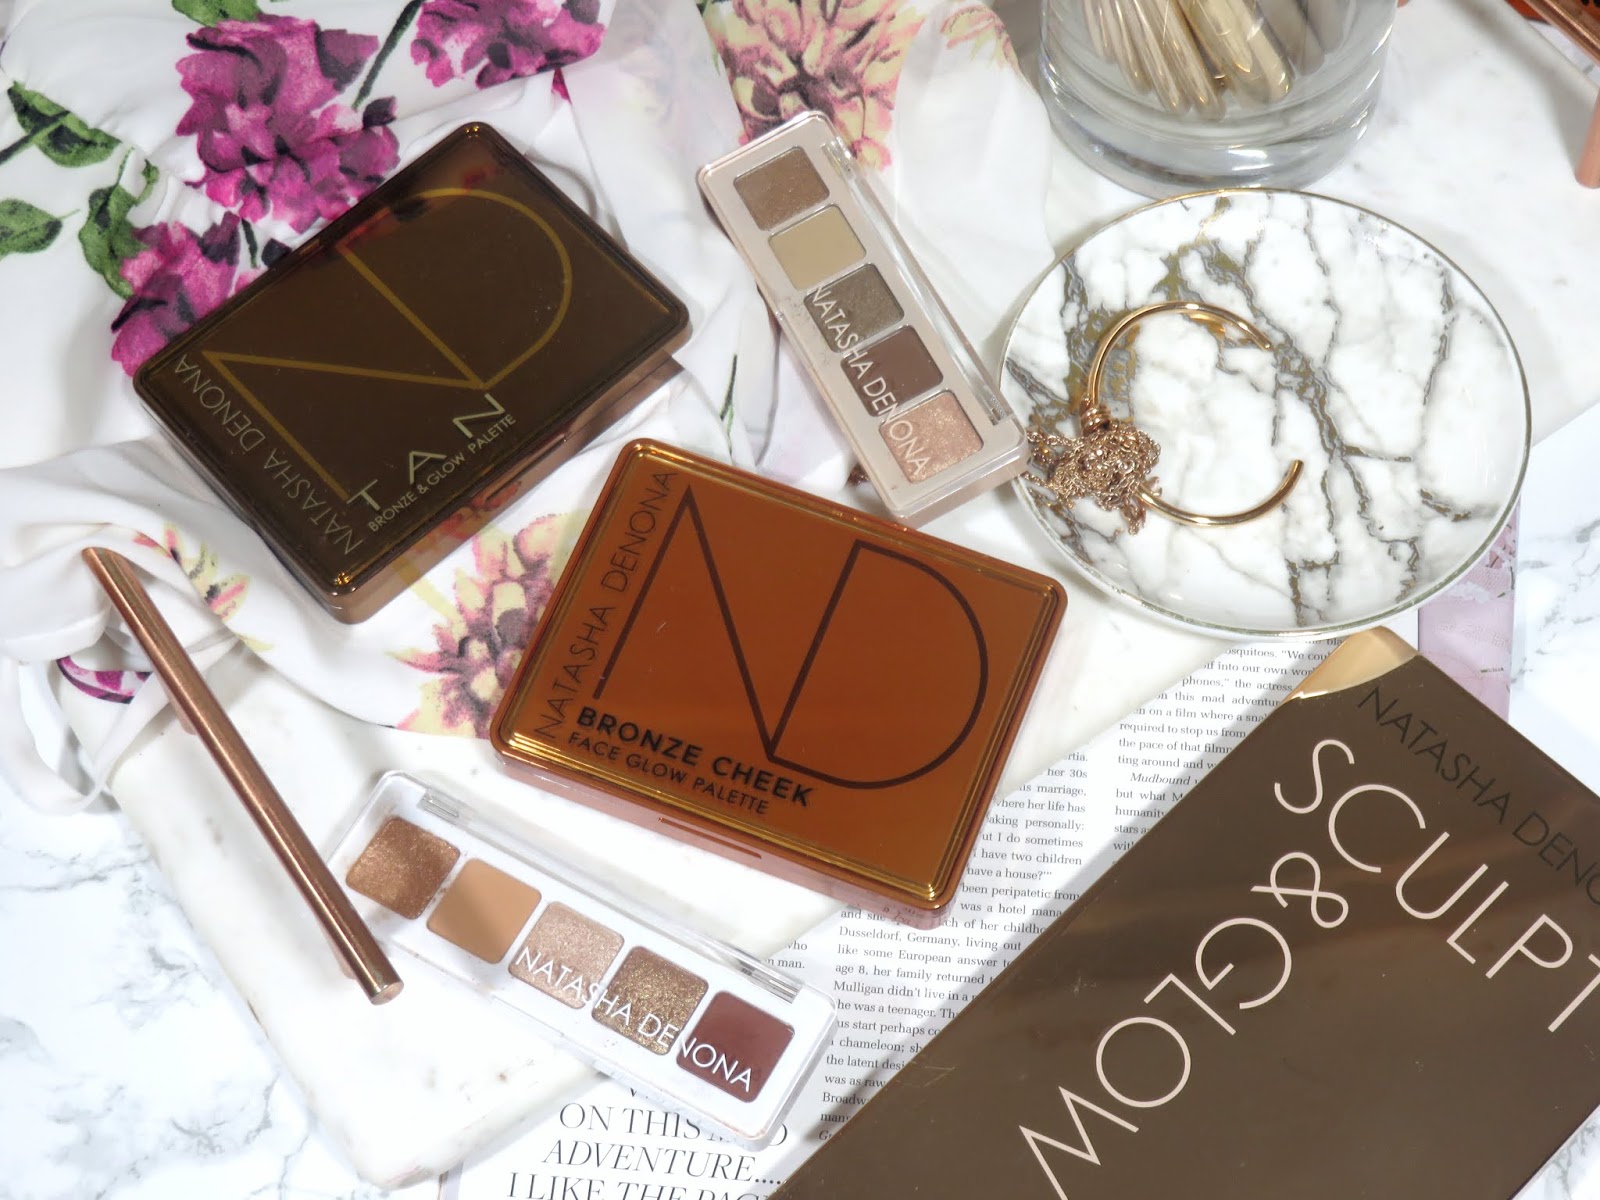 Natasha Denona Bronze Face Glow Palette Review and Swatches